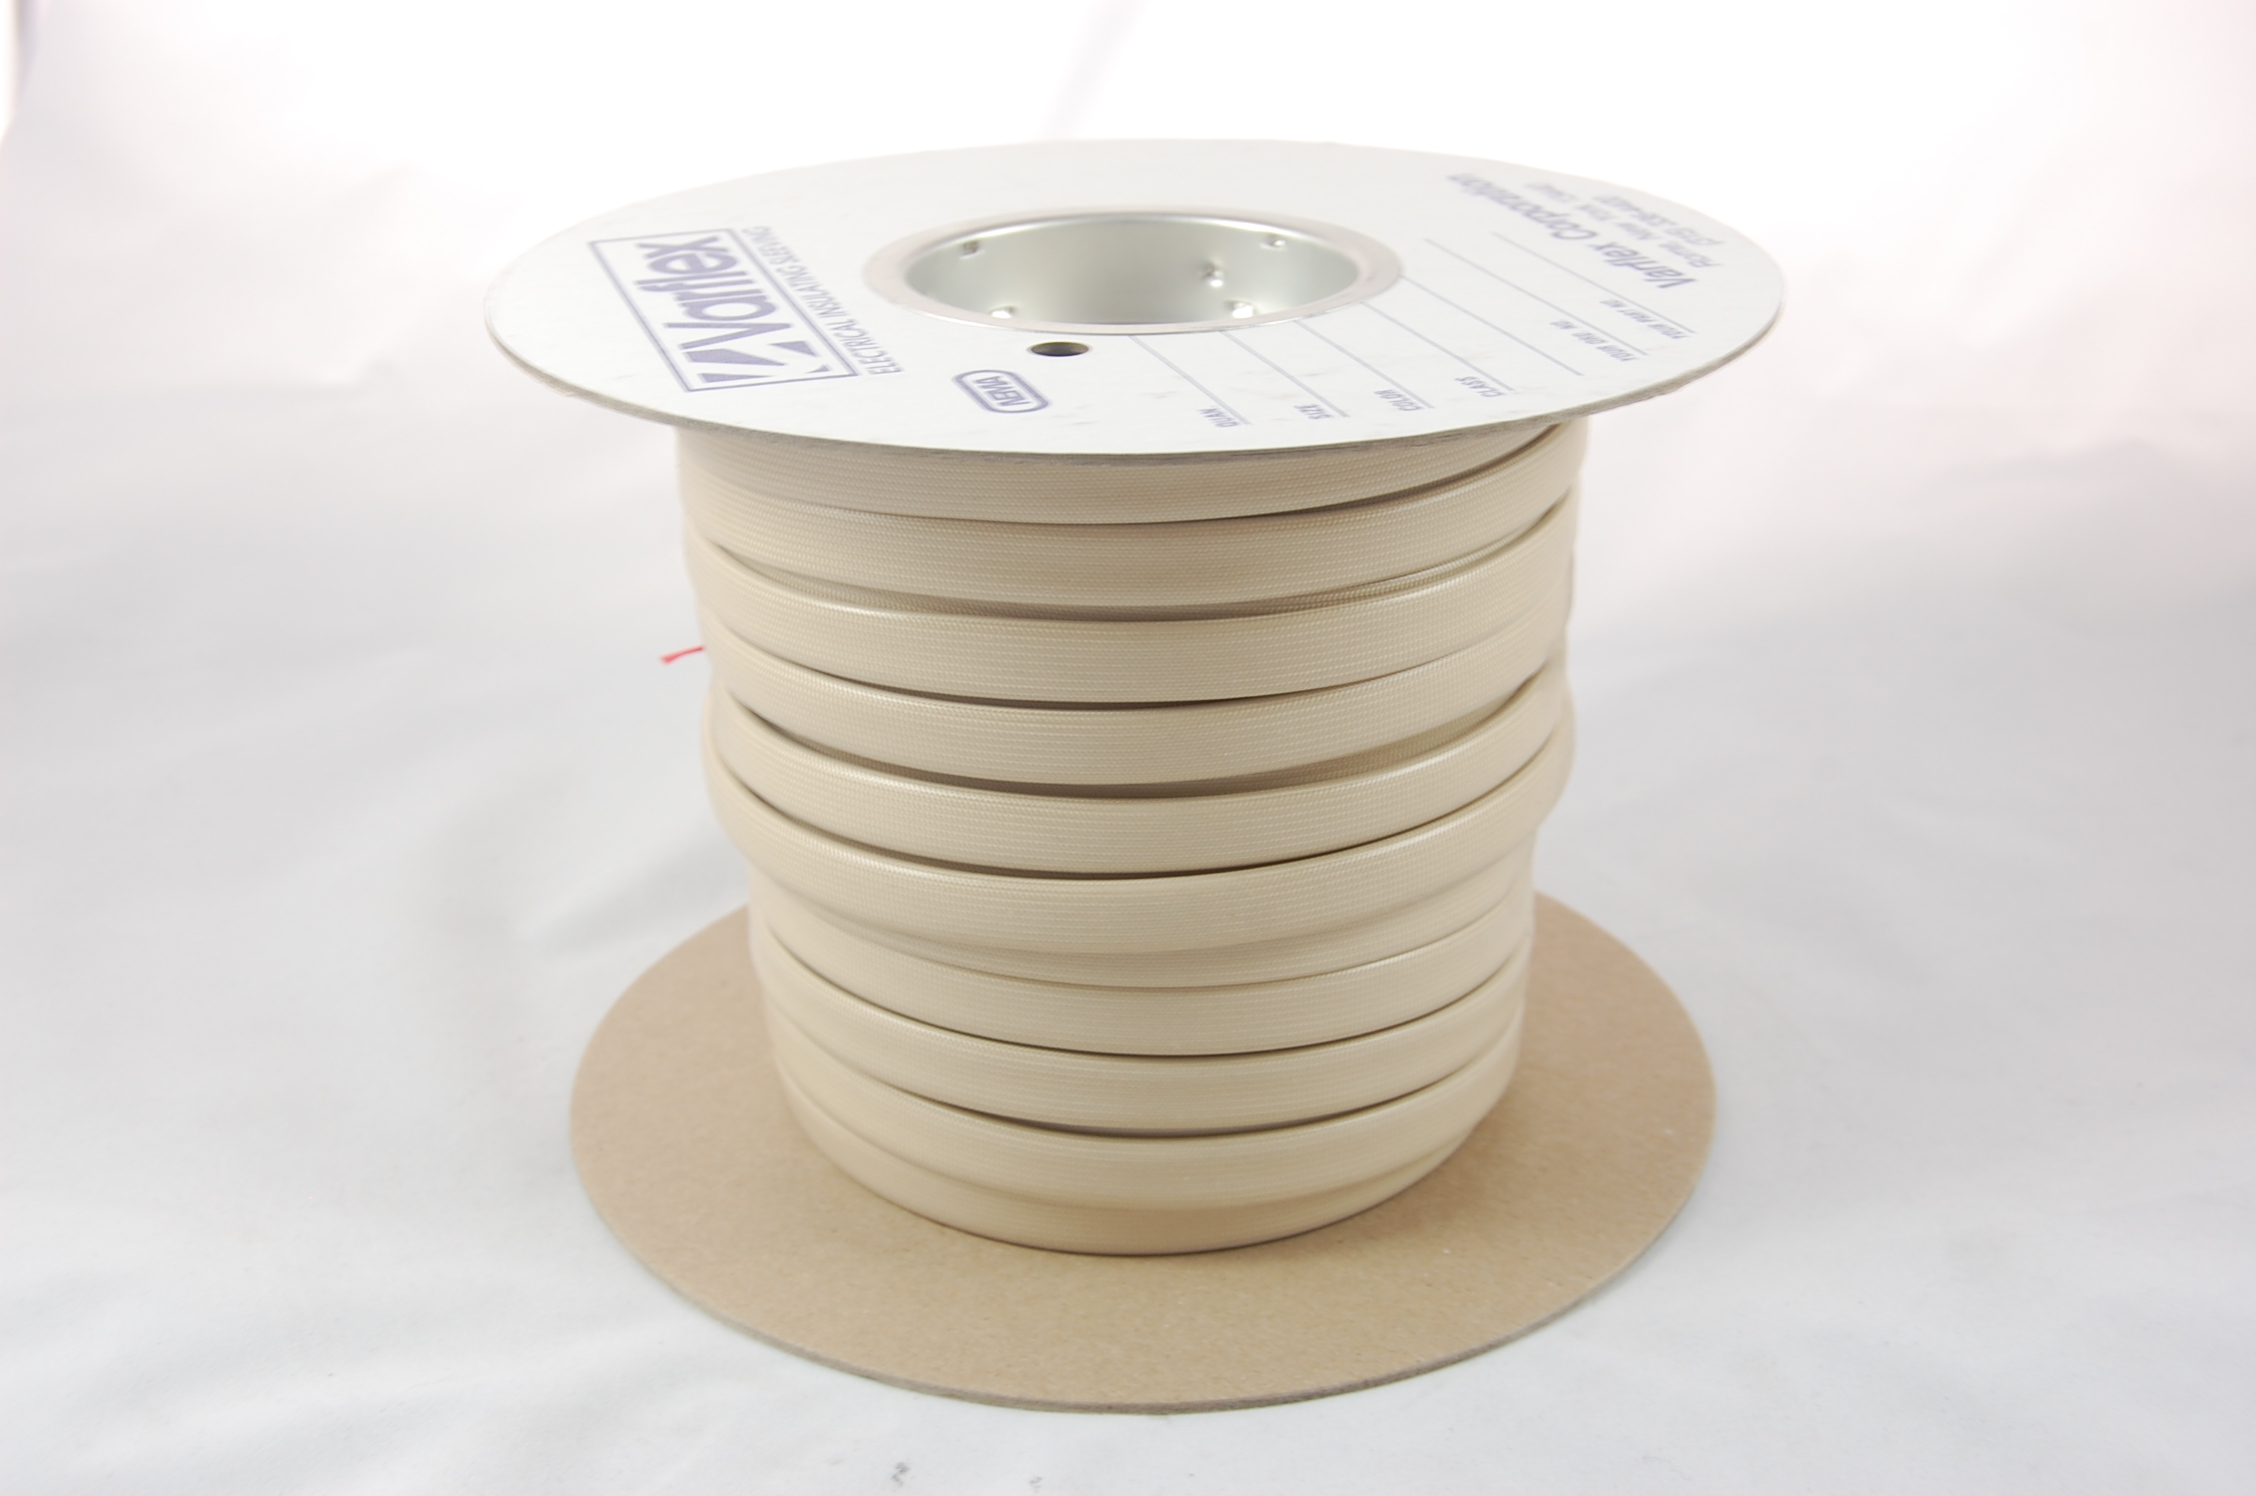 #20 AWG Varglas Silicone Rubber Grade H-A-1 (8000V) High Temperature Silicone Rubber Coated Braided Fiberglass Sleeving 200°C, natural, 500 FT per spool